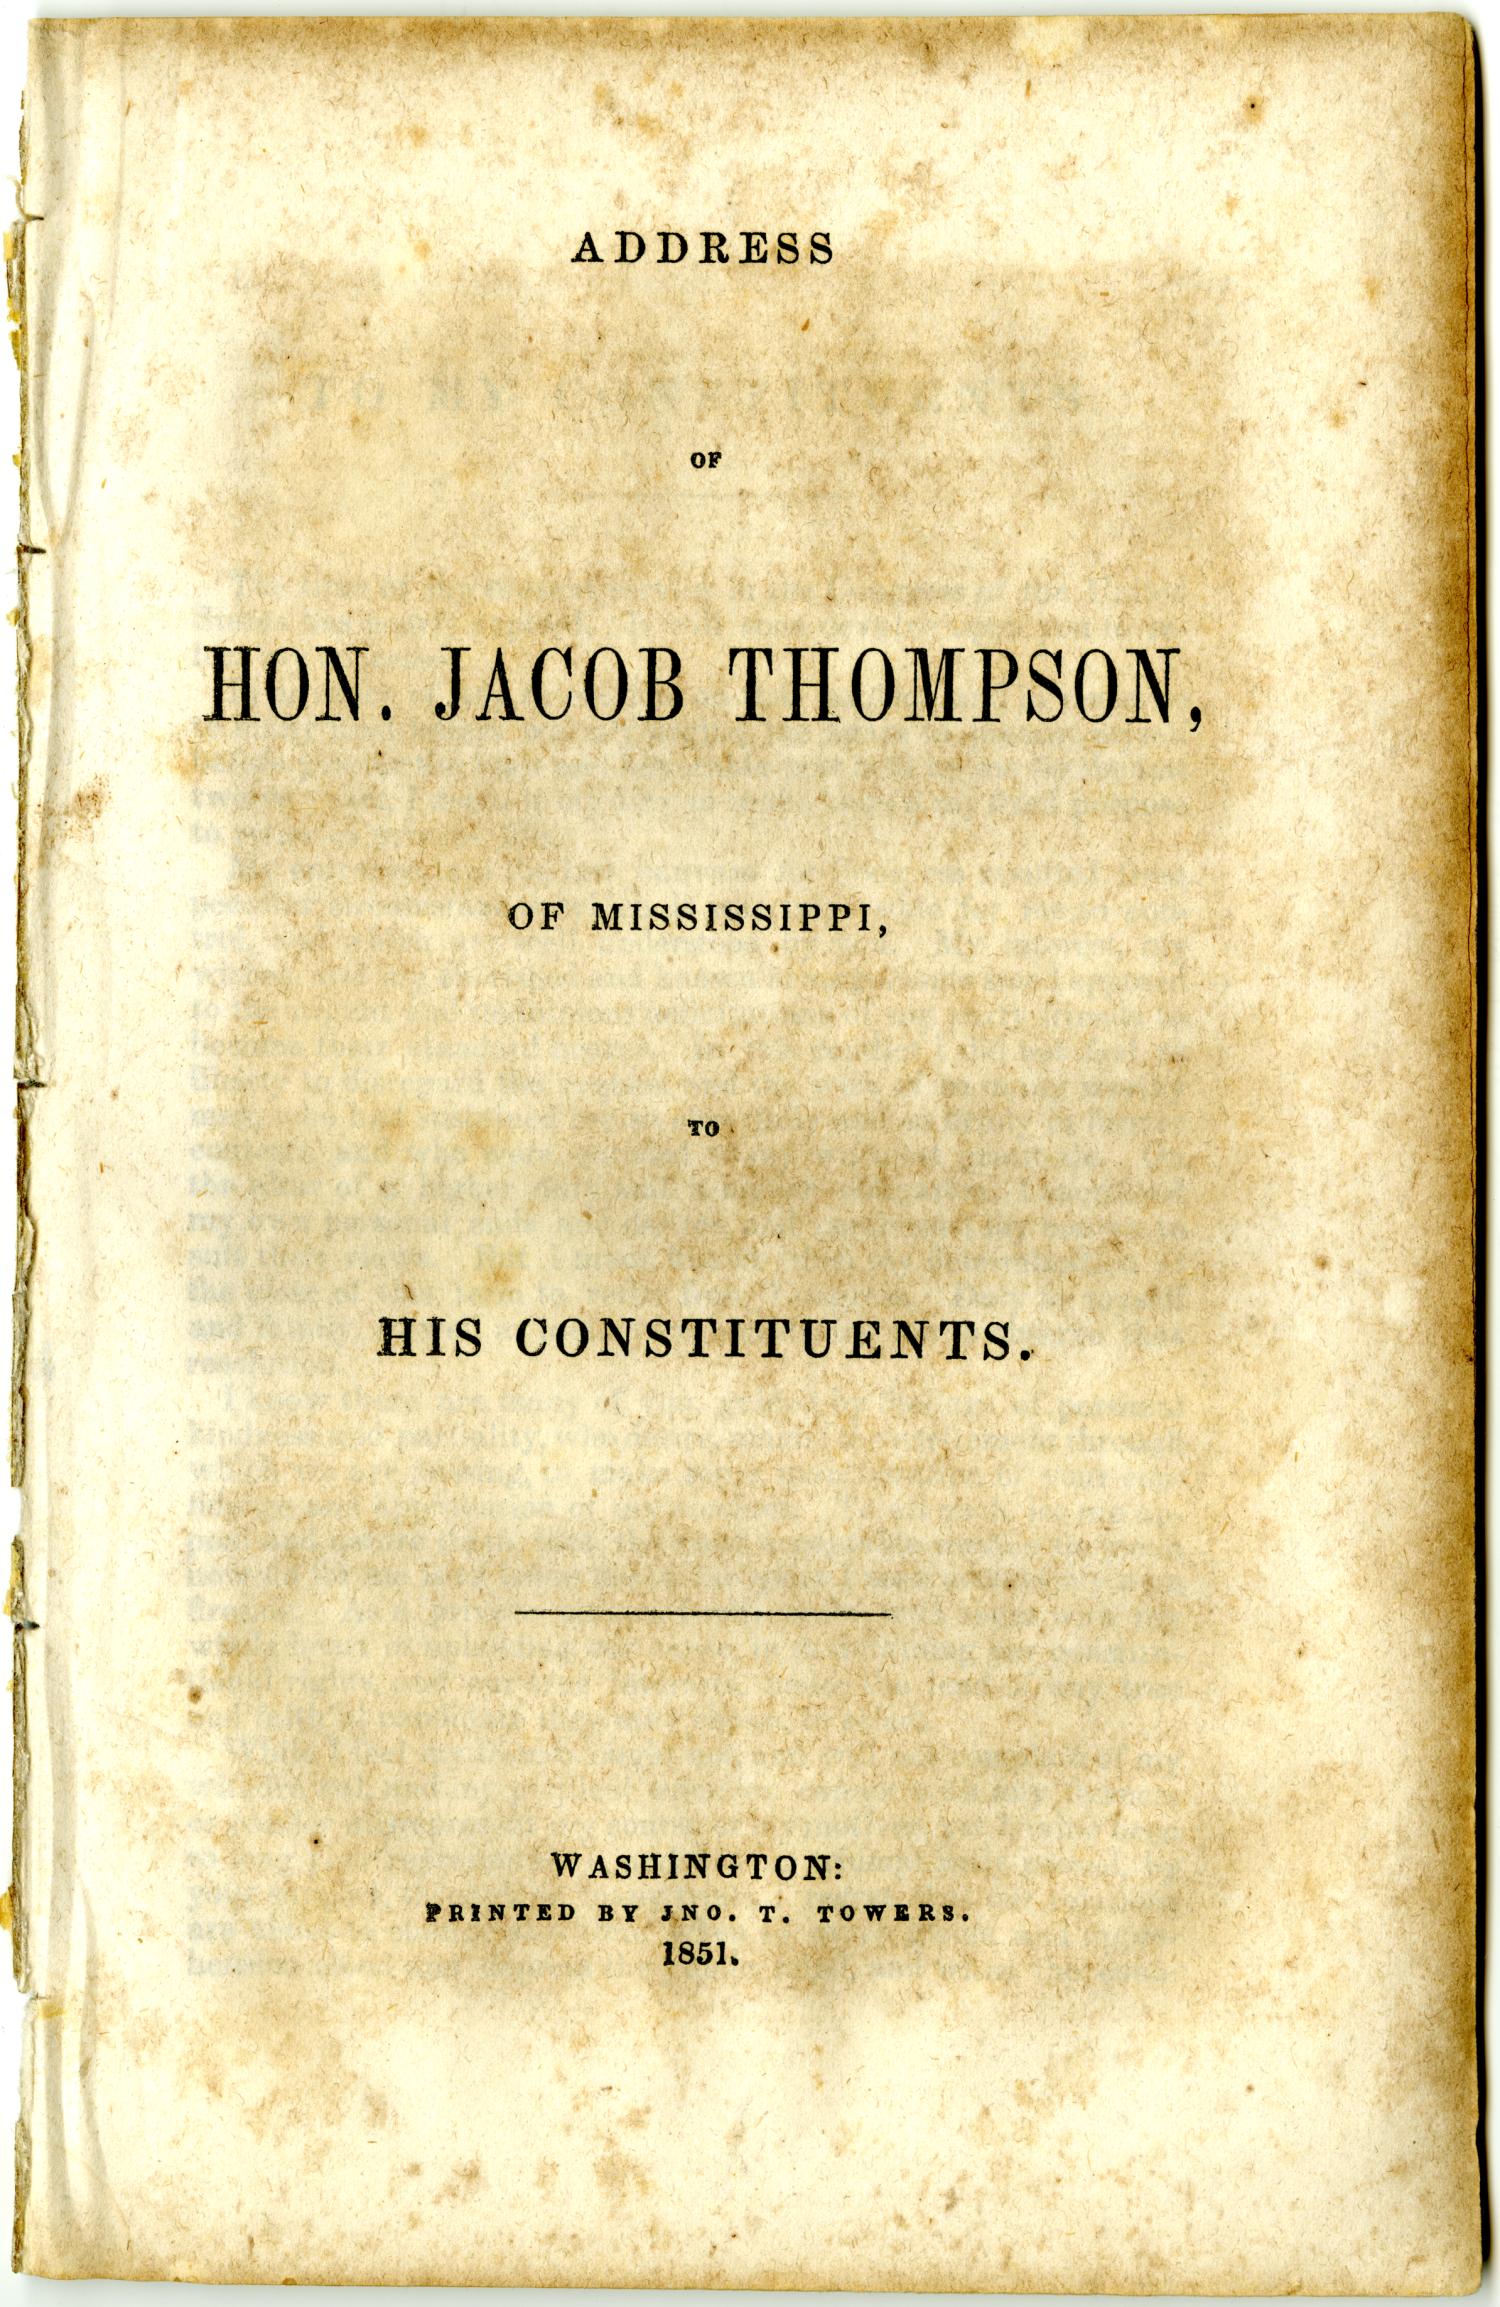 Address of Hon. Jacob Thompson, of Mississippi, to his constituents.
                                                
                                                    [Sequence #]: 1 of 16
                                                